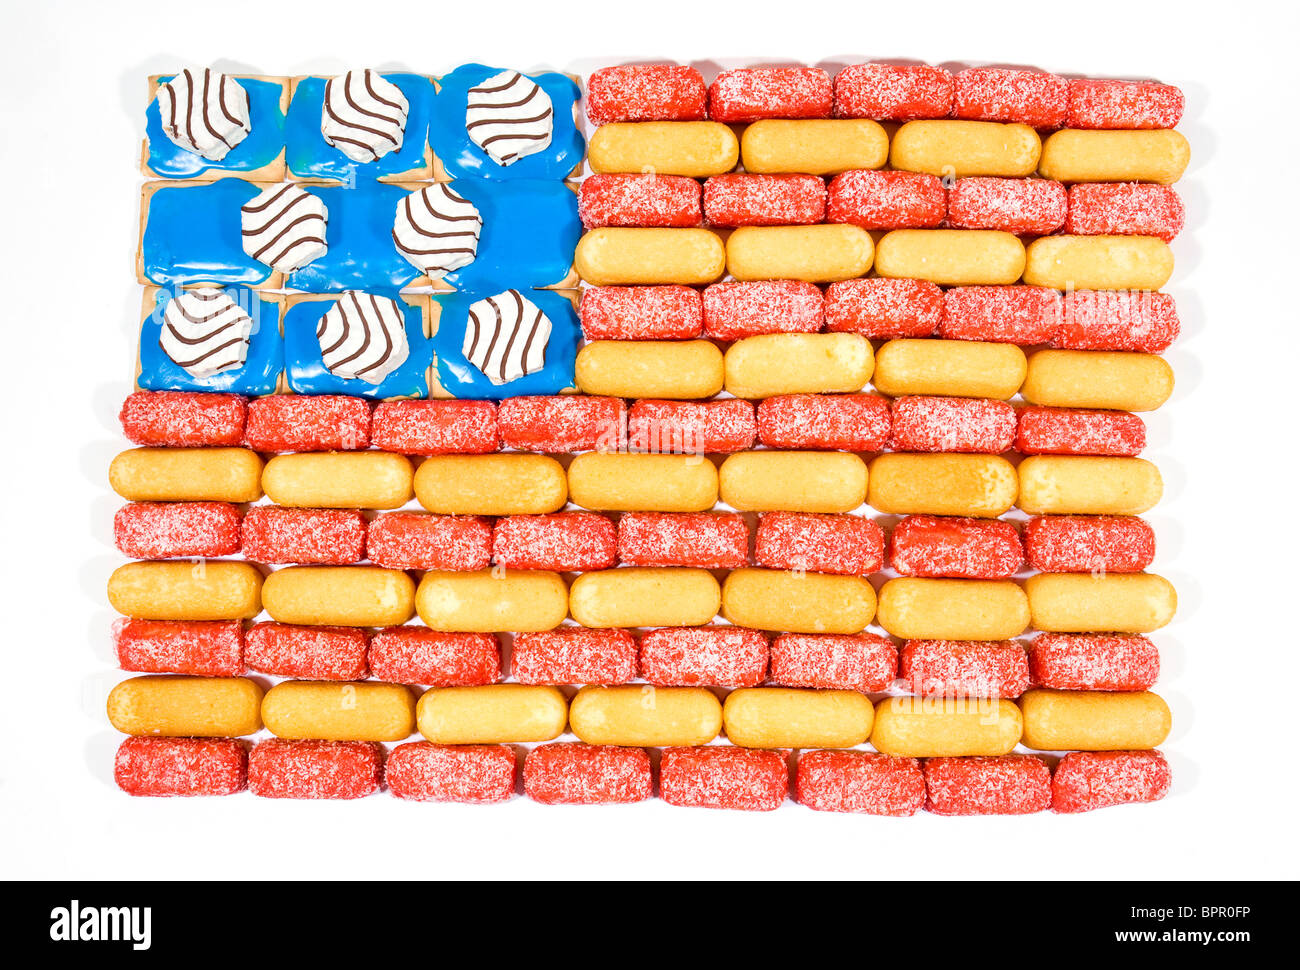 A American Flag made of junk food items including Twinkies, Zingers and Pop Tarts.  Stock Photo